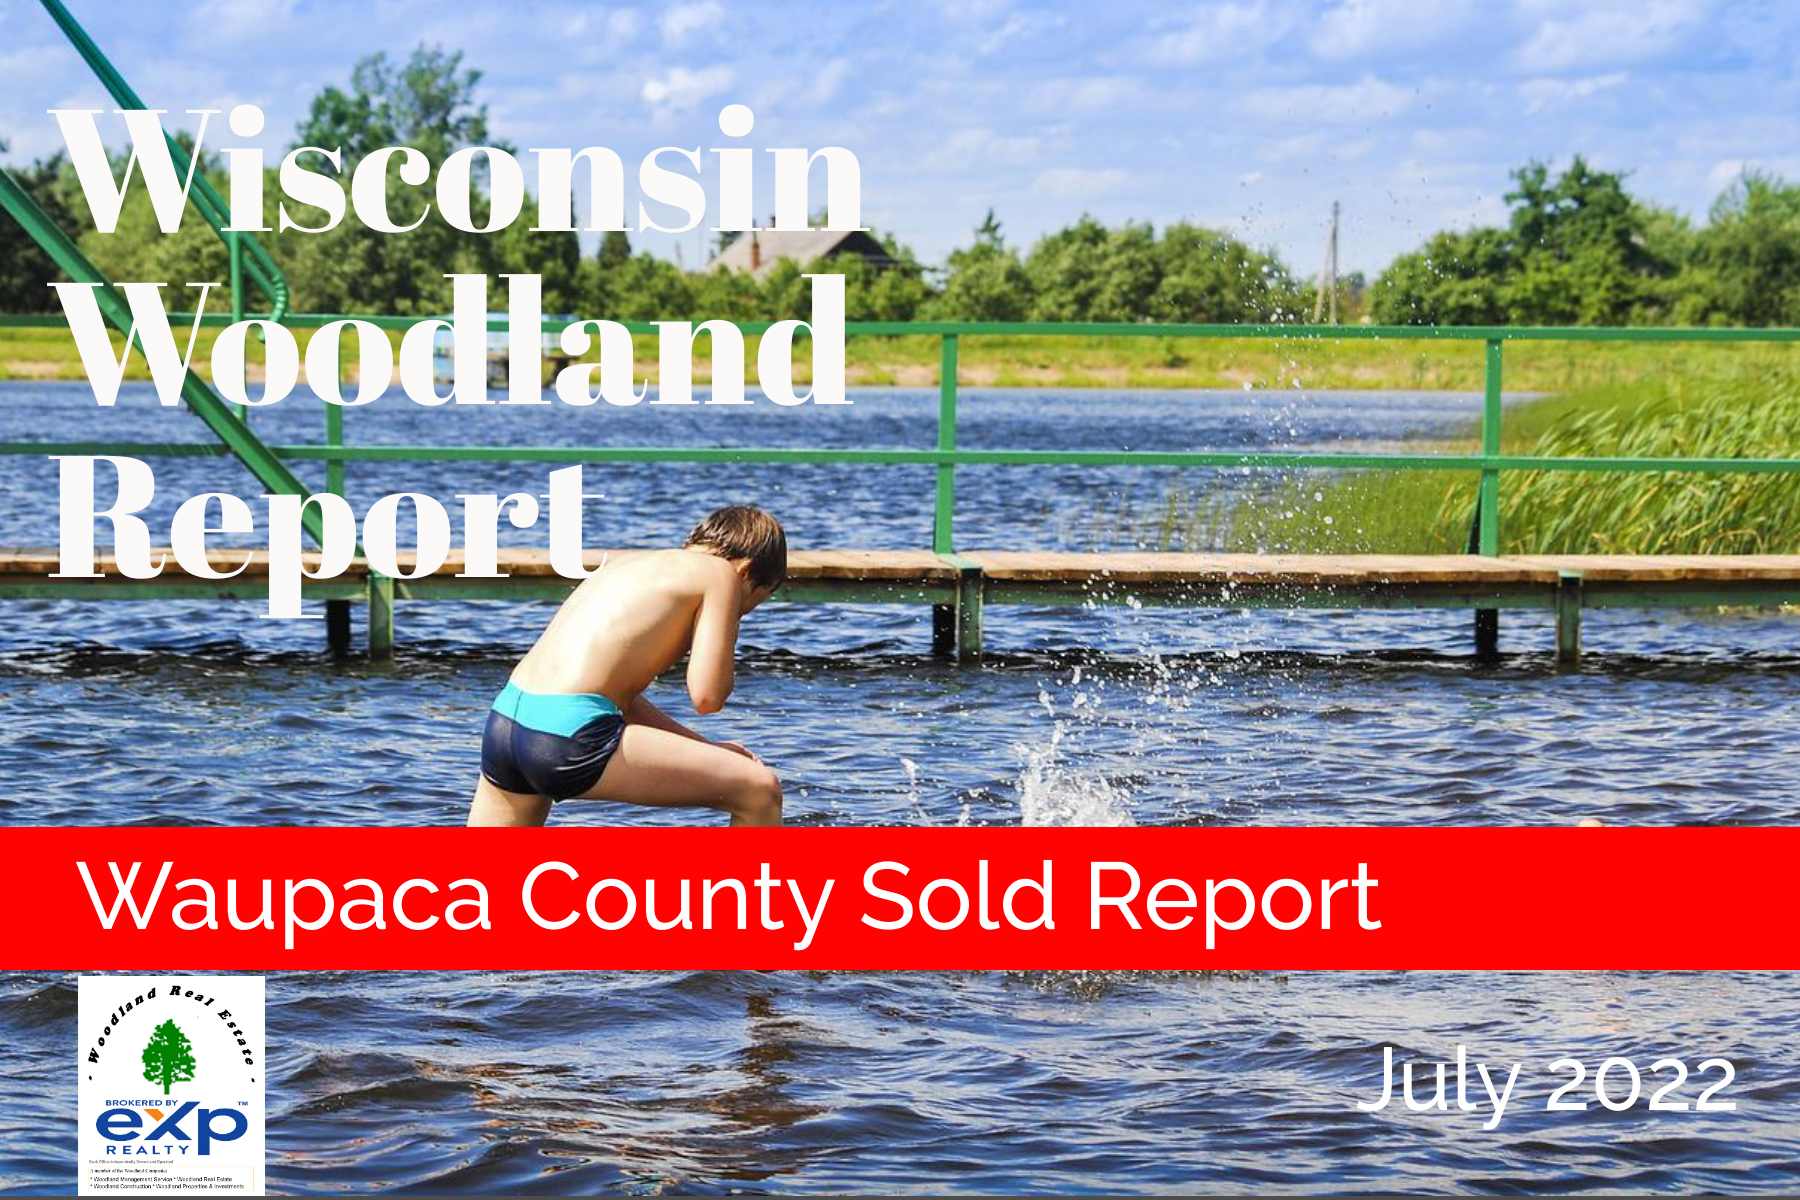 Waupaca_SOLD_Woodland-Reports-1800x1200-layout1775-1hcbhqg.png